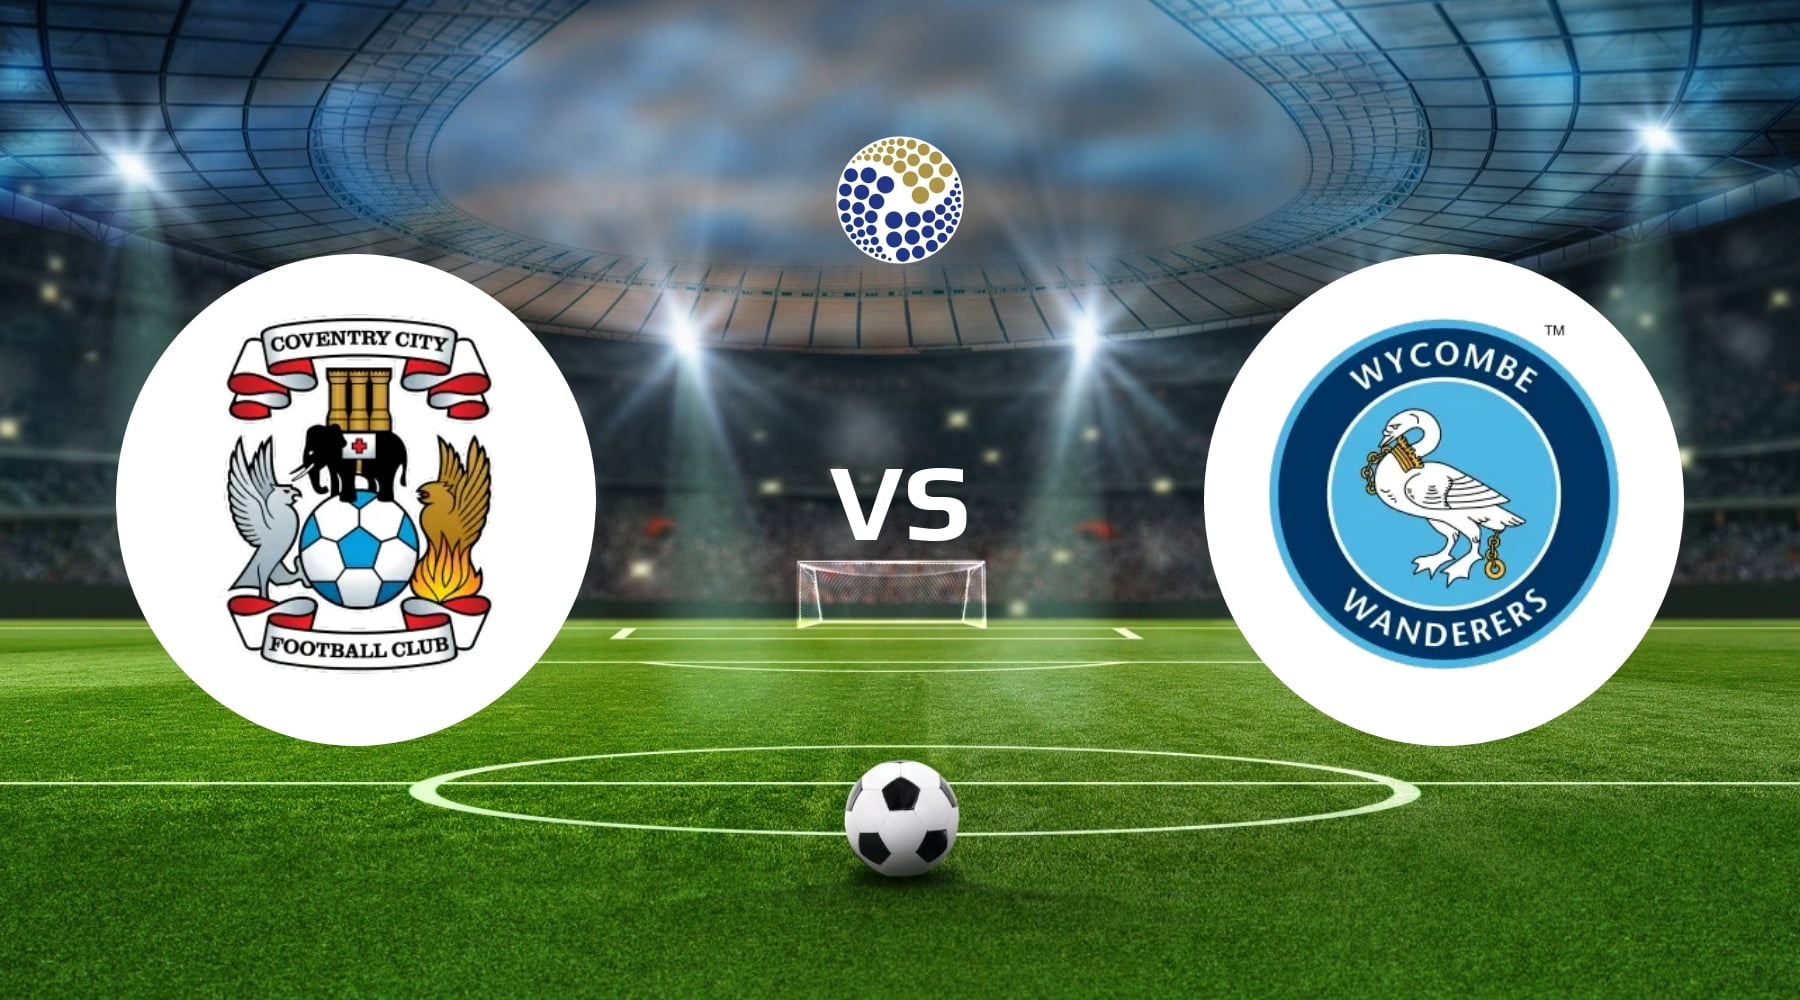 Coventry City vs Wycombe Wanderers Betting Tips & Predictions